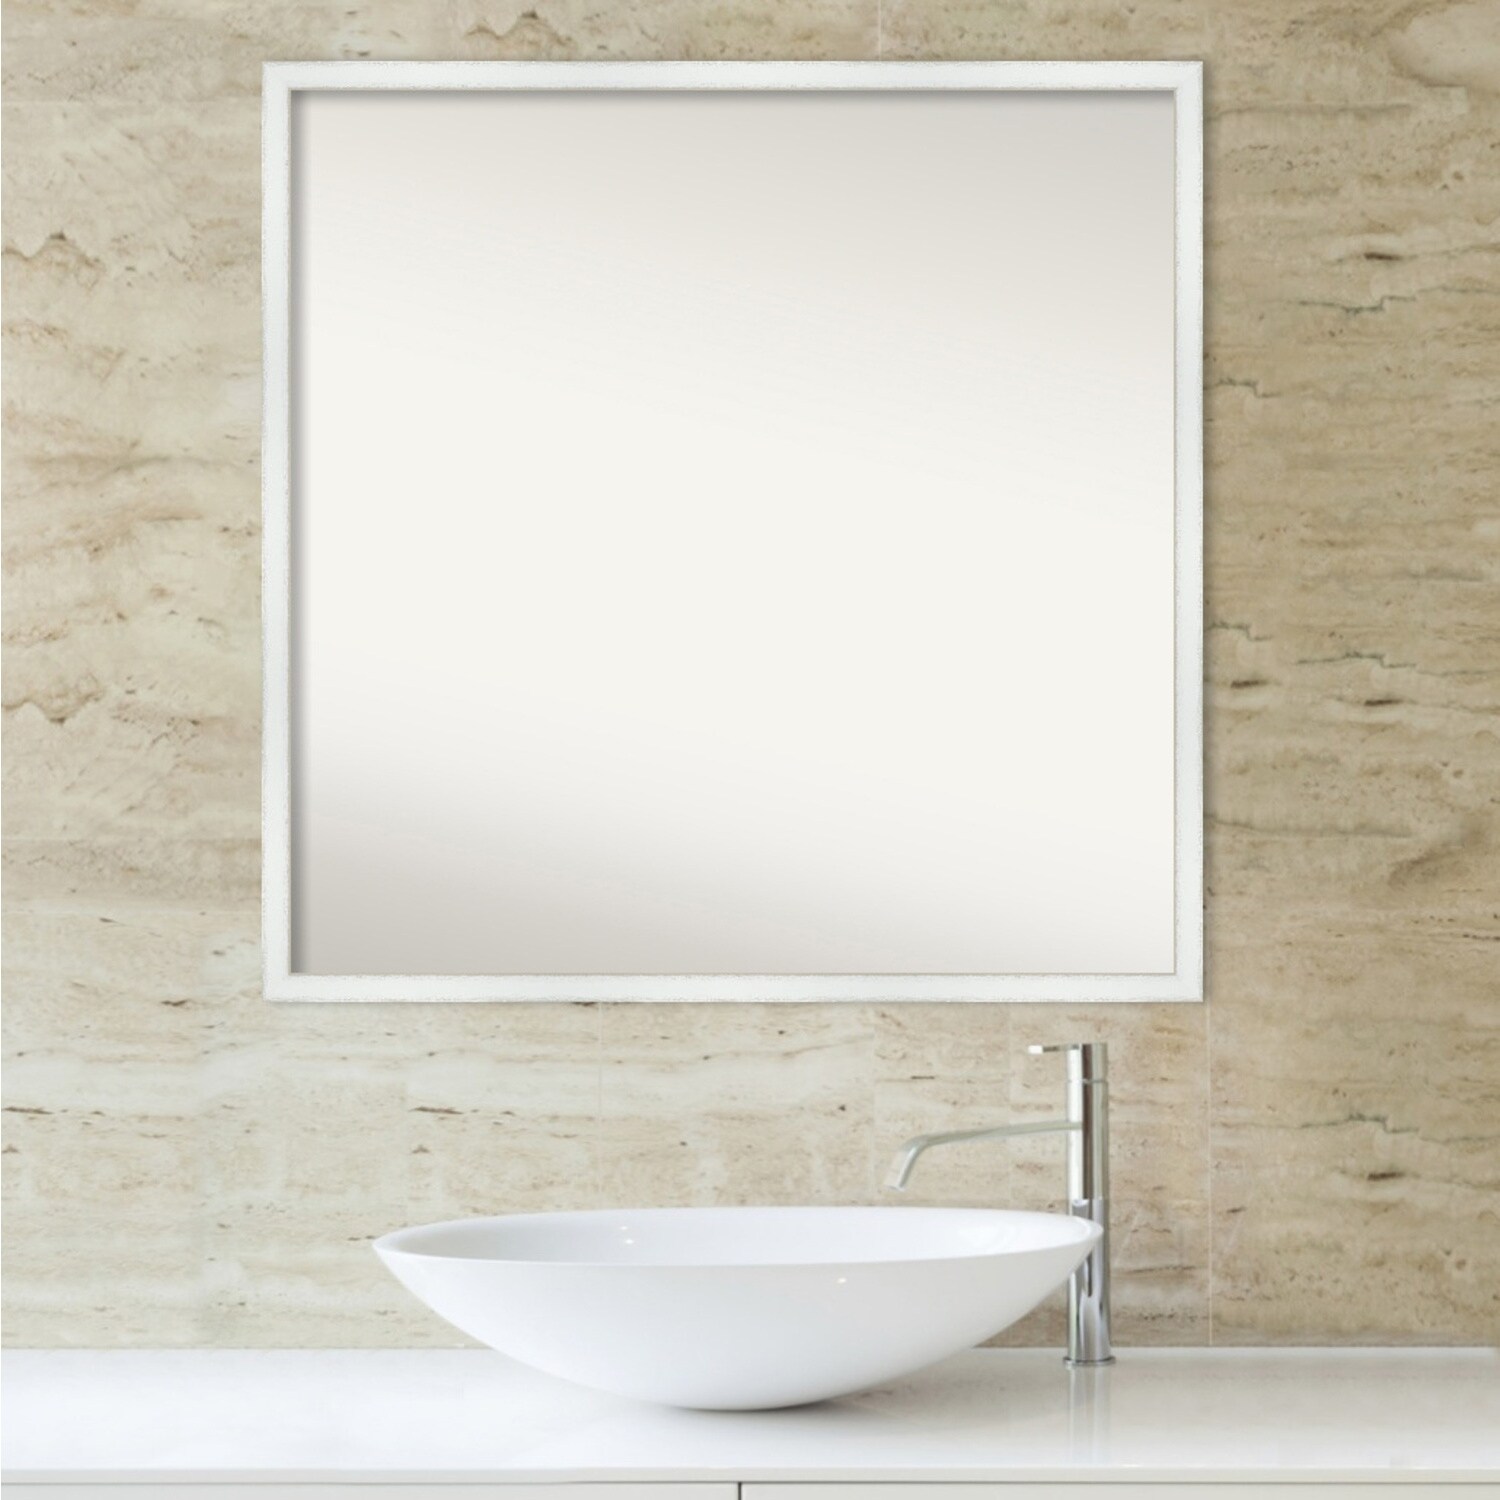 Non-Beveled Wood Bathroom Wall Mirror - Breeze Distressed White Frame